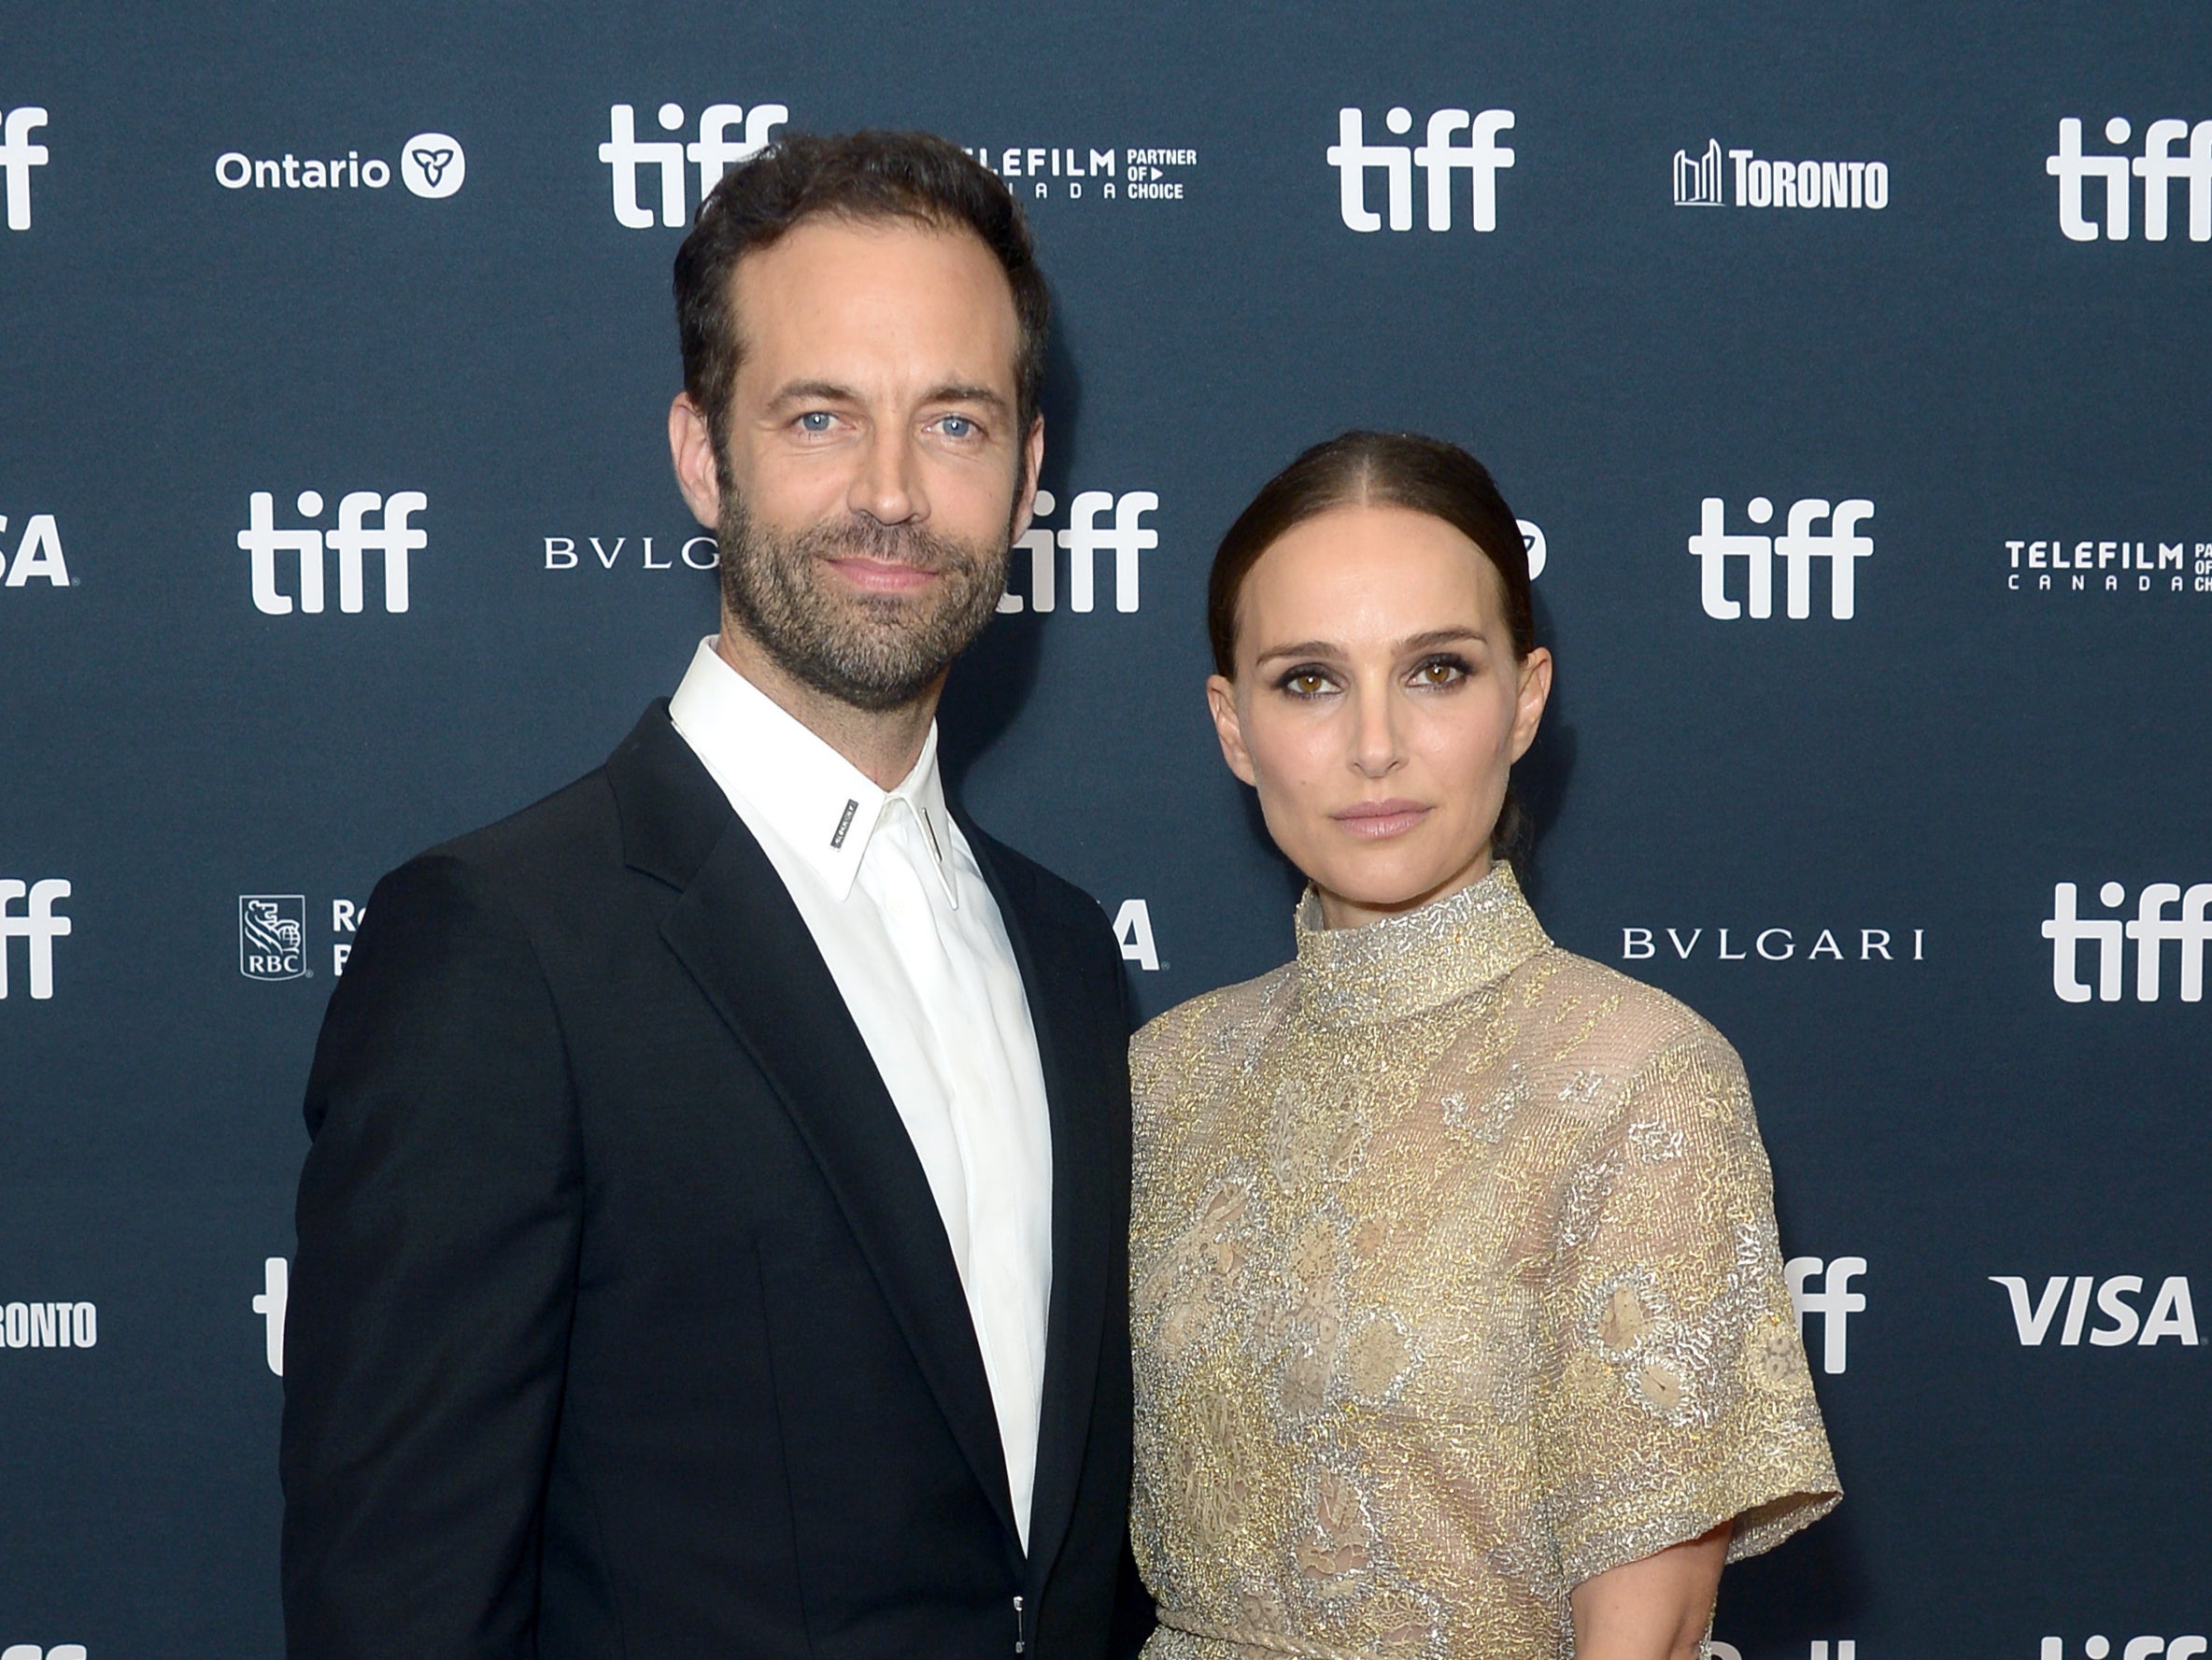 Millepied and Portman were married in August 2012 after meeting on set of 2010’s ‘Black Swan’